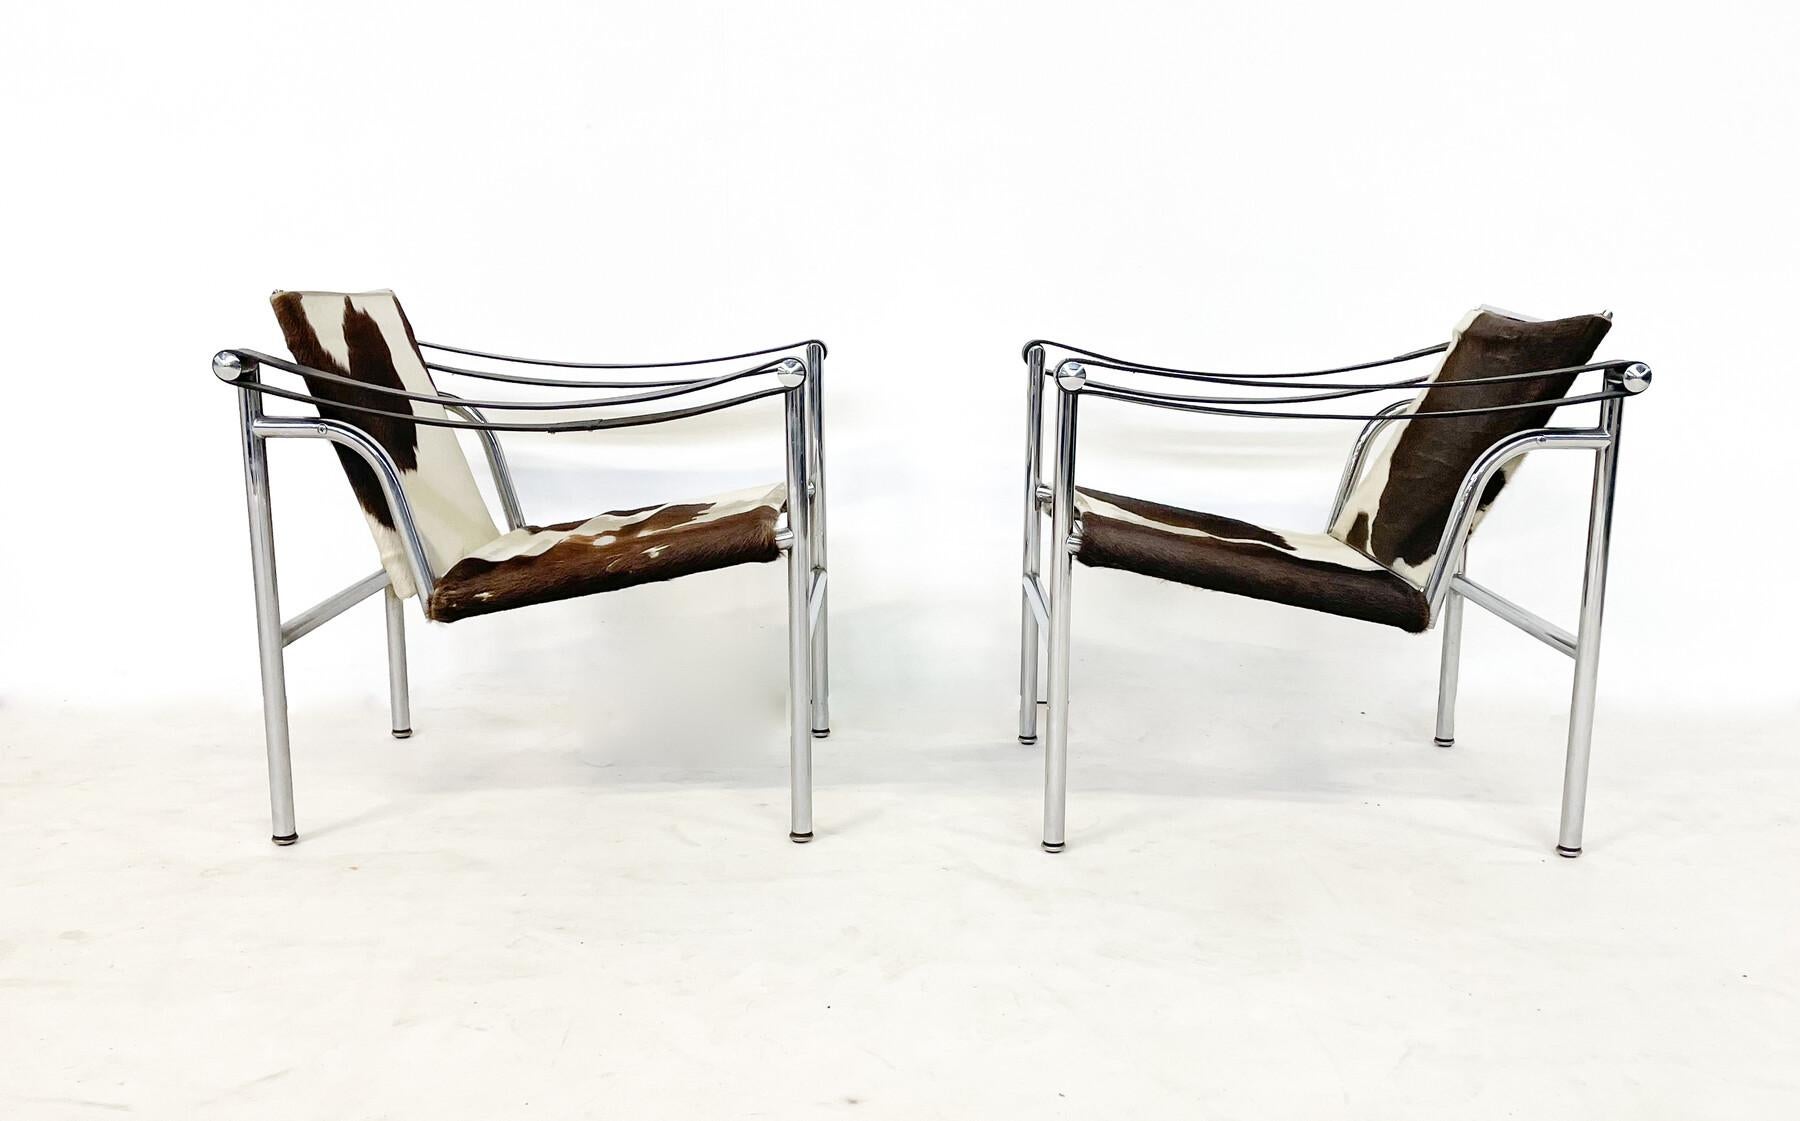 Mid-Century Modern set of 2 LC1 armchairs by Le Corbusier, Pierre Jeanneret, Charlotte Perriand, 1960s.